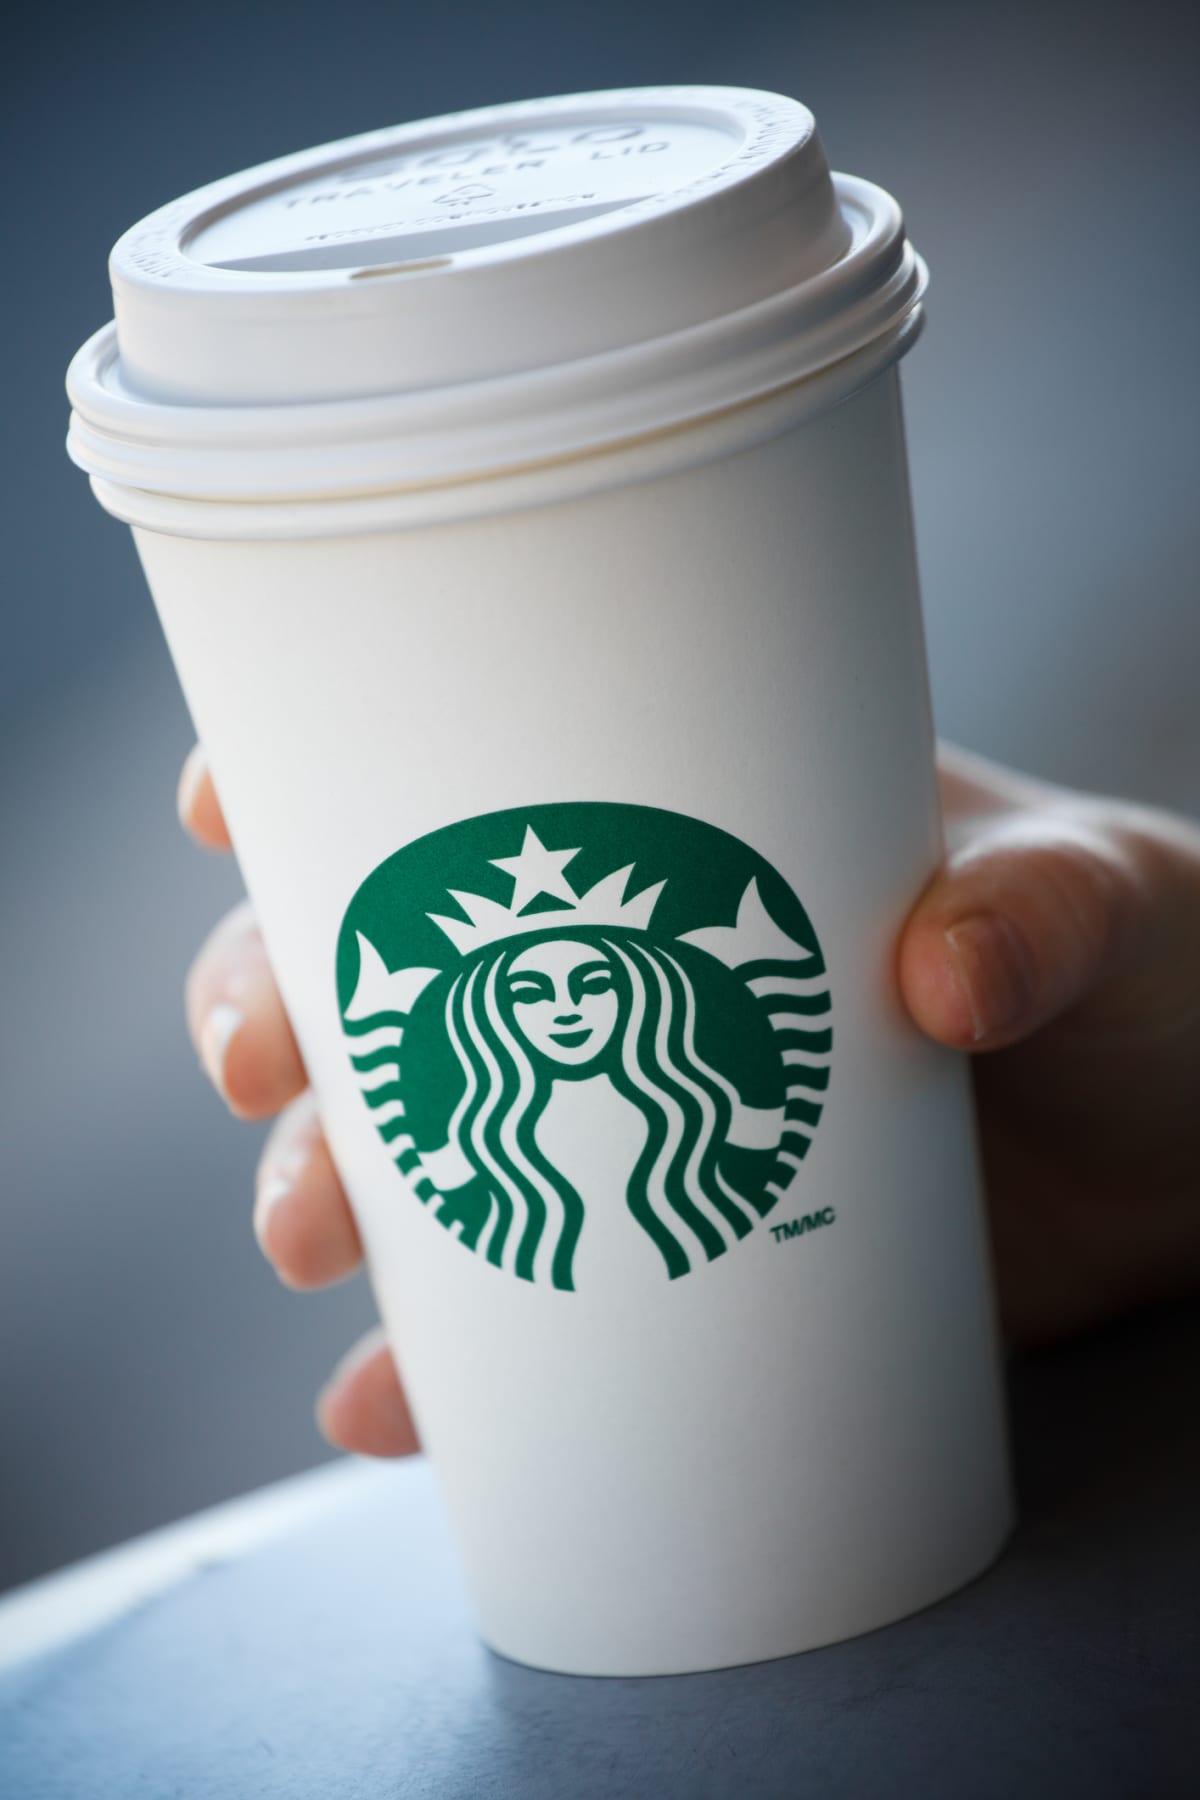 Hand holding a Starbucks coffee cup